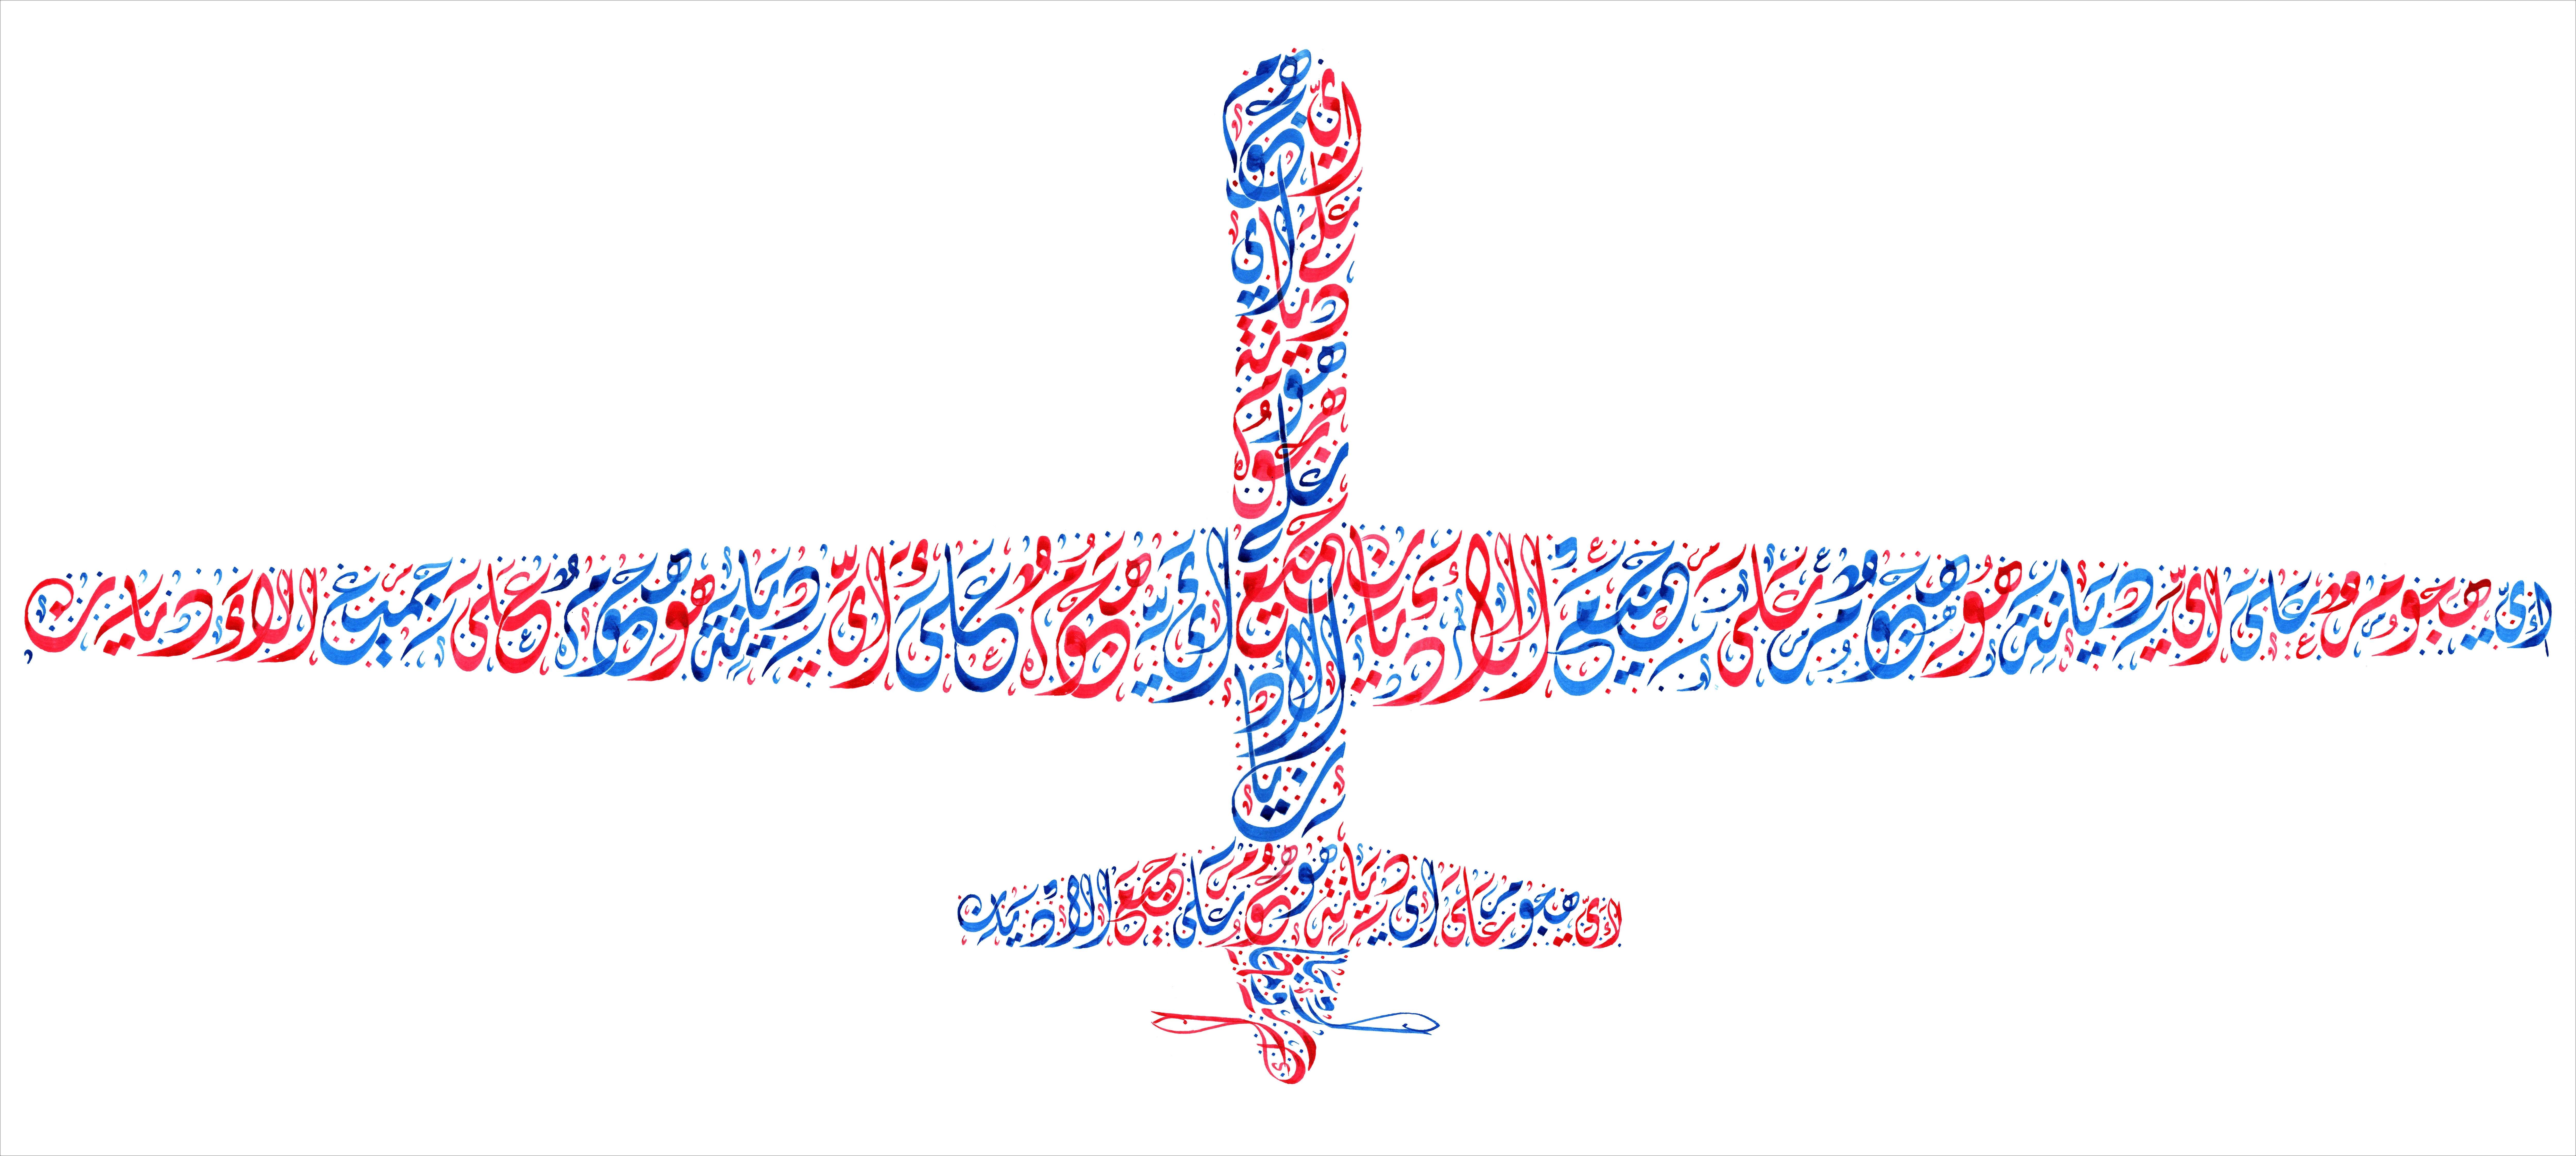 Obama's Drone - Arabic Calligraphy by Everitte Barbee